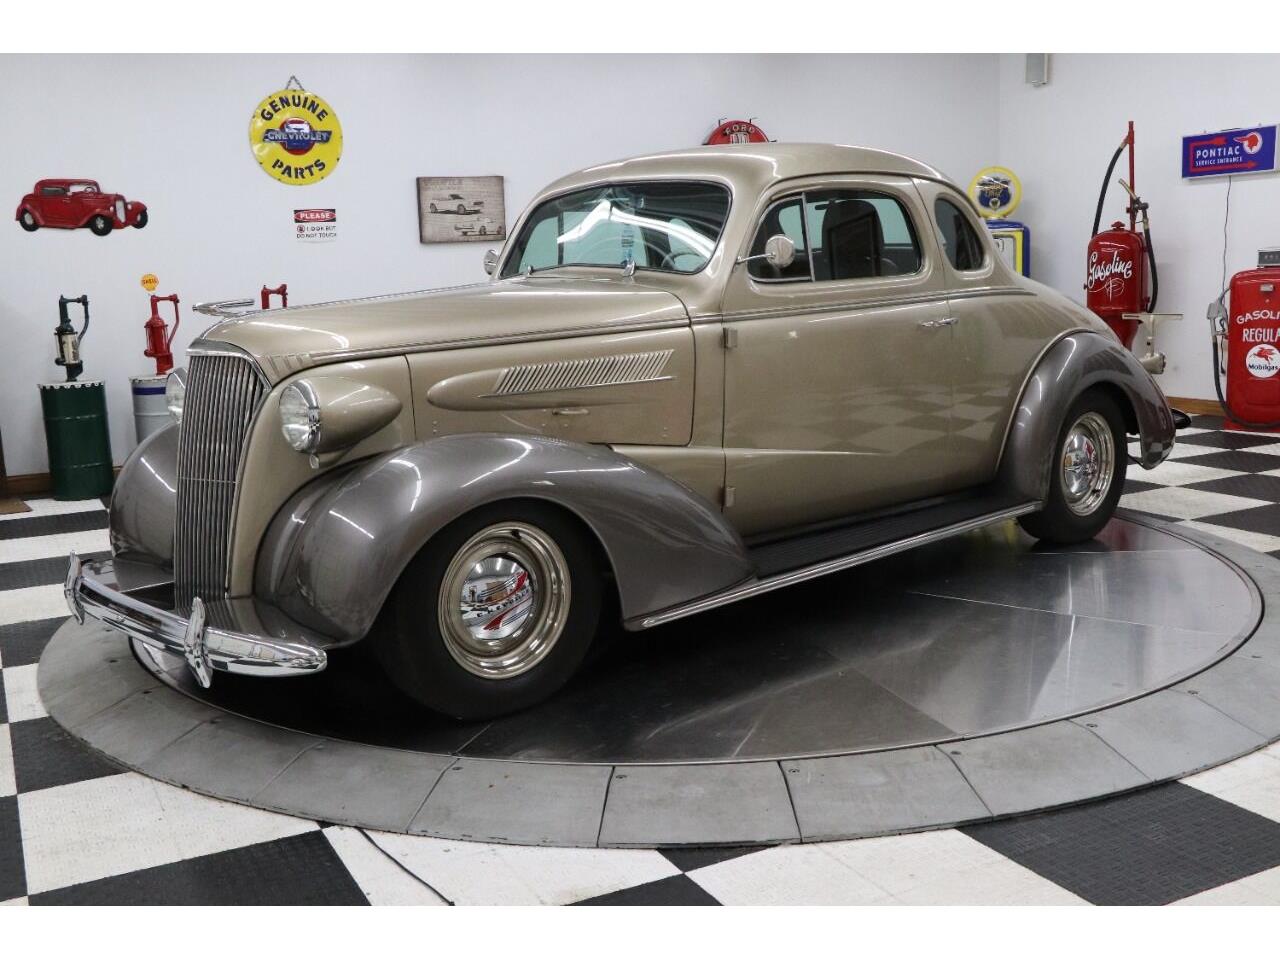 For Sale: 1937 Chevrolet Street Rod in Clarence, Iowa for sale in Clarence, IA